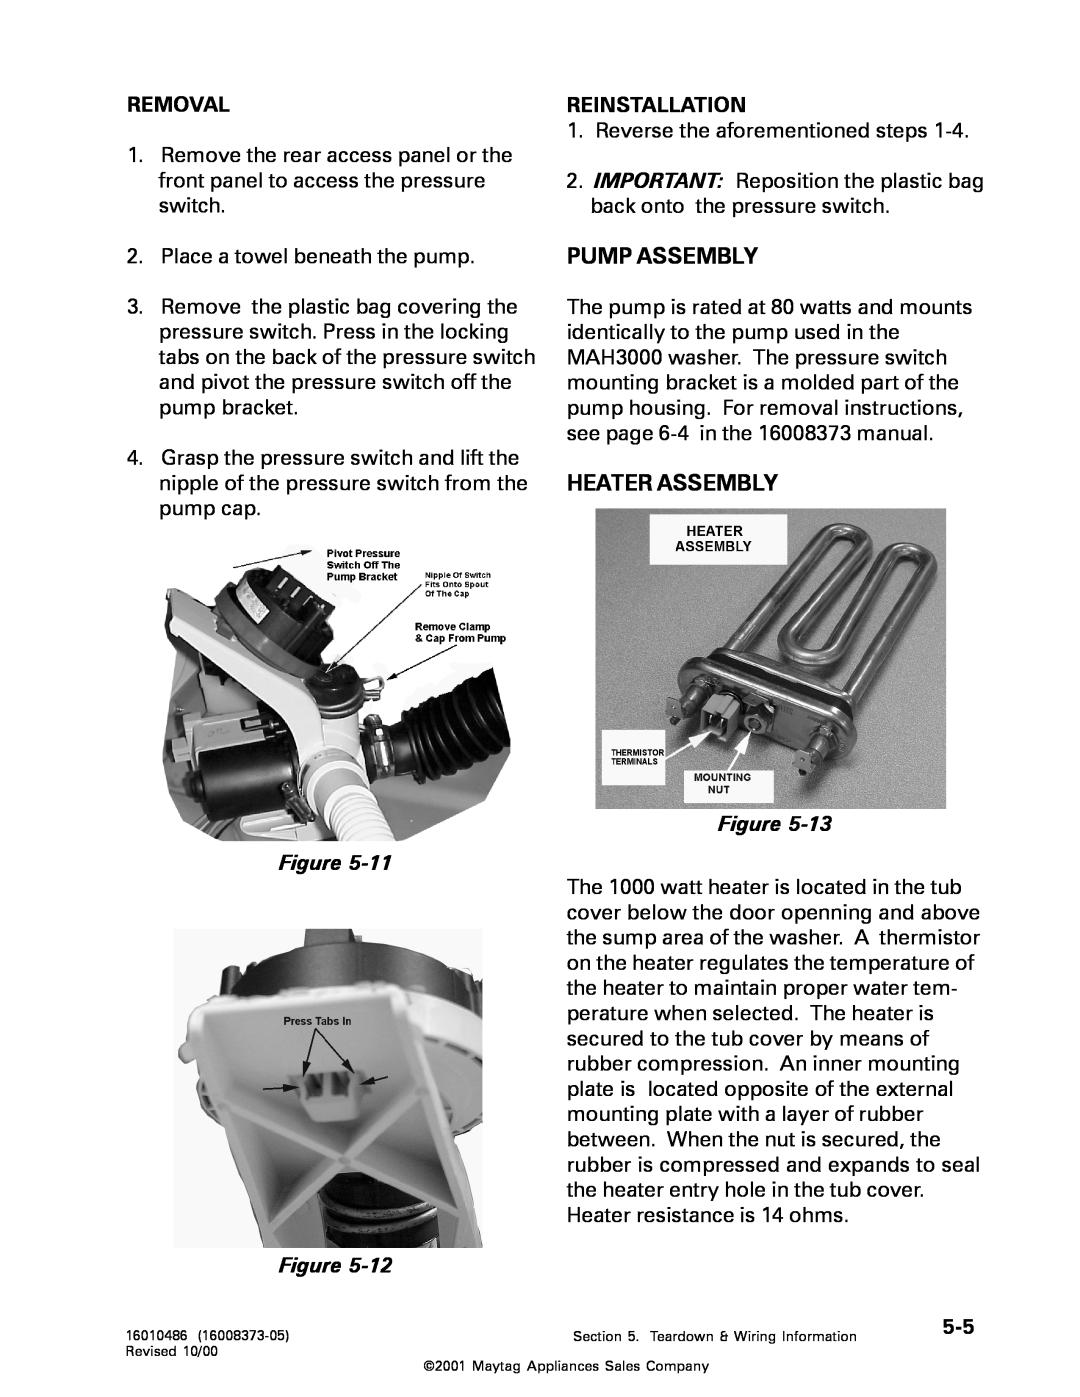 Whirlpool MAH3000 service manual Pump Assembly, Heater Assembly, Removal, Reinstallation 